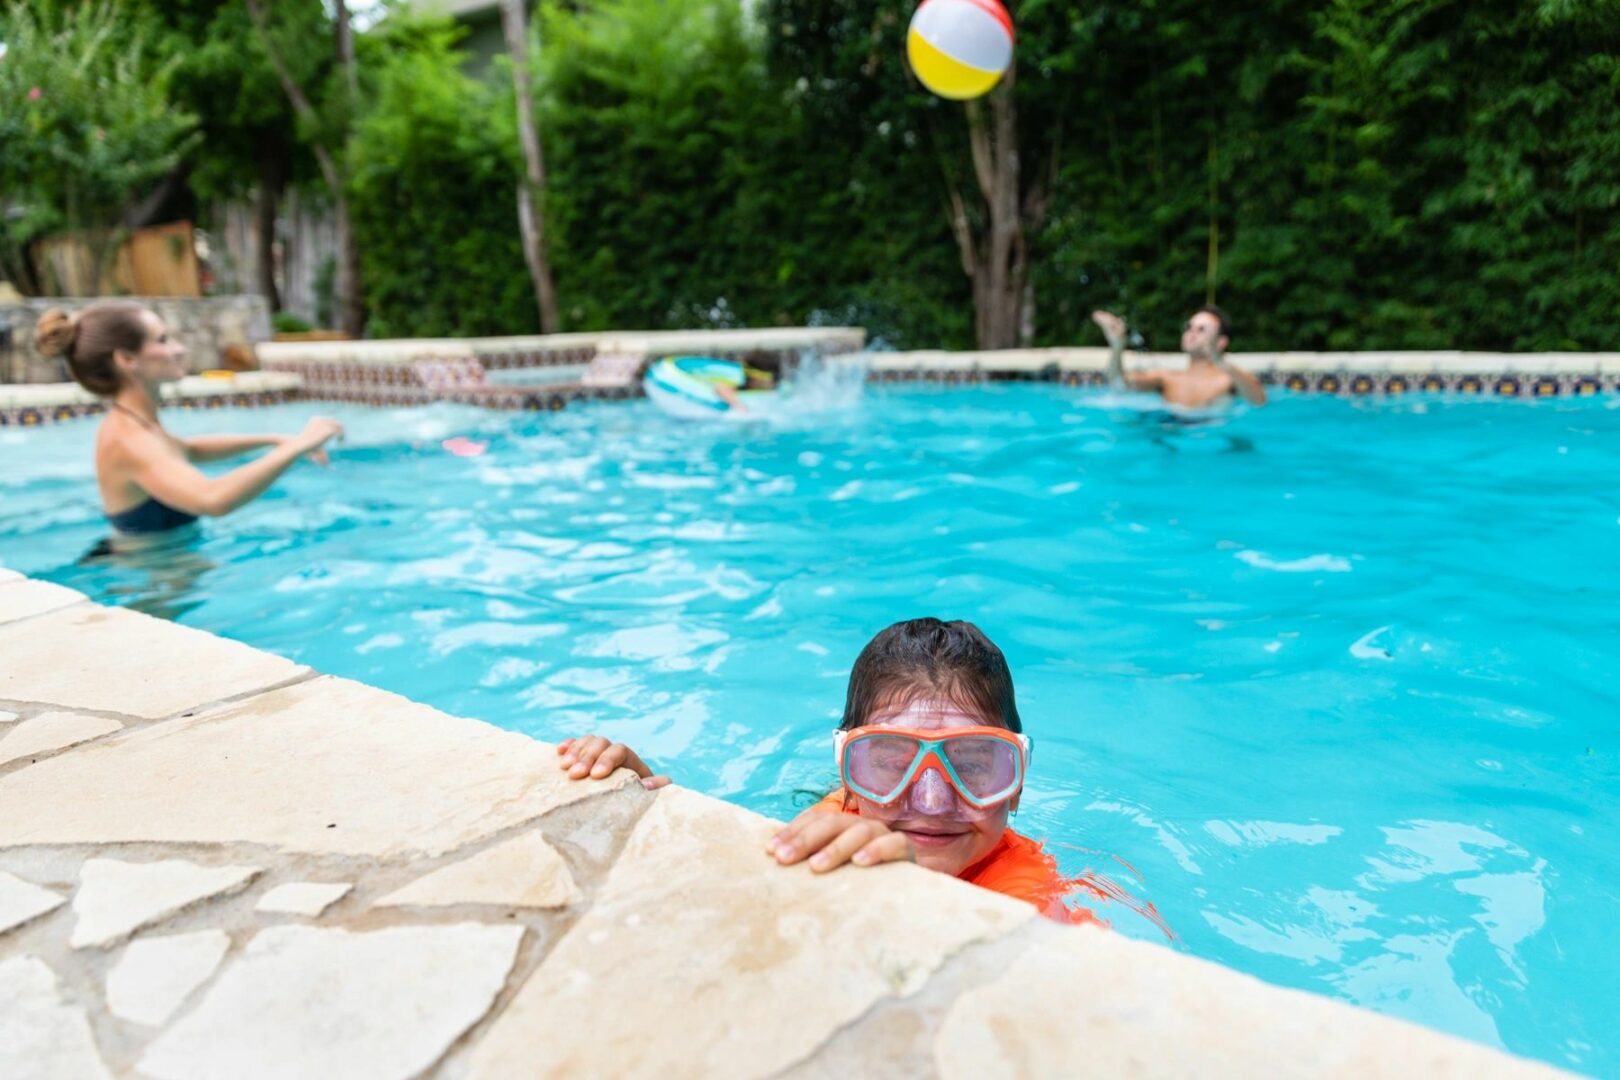 A boy in the pool with goggles on